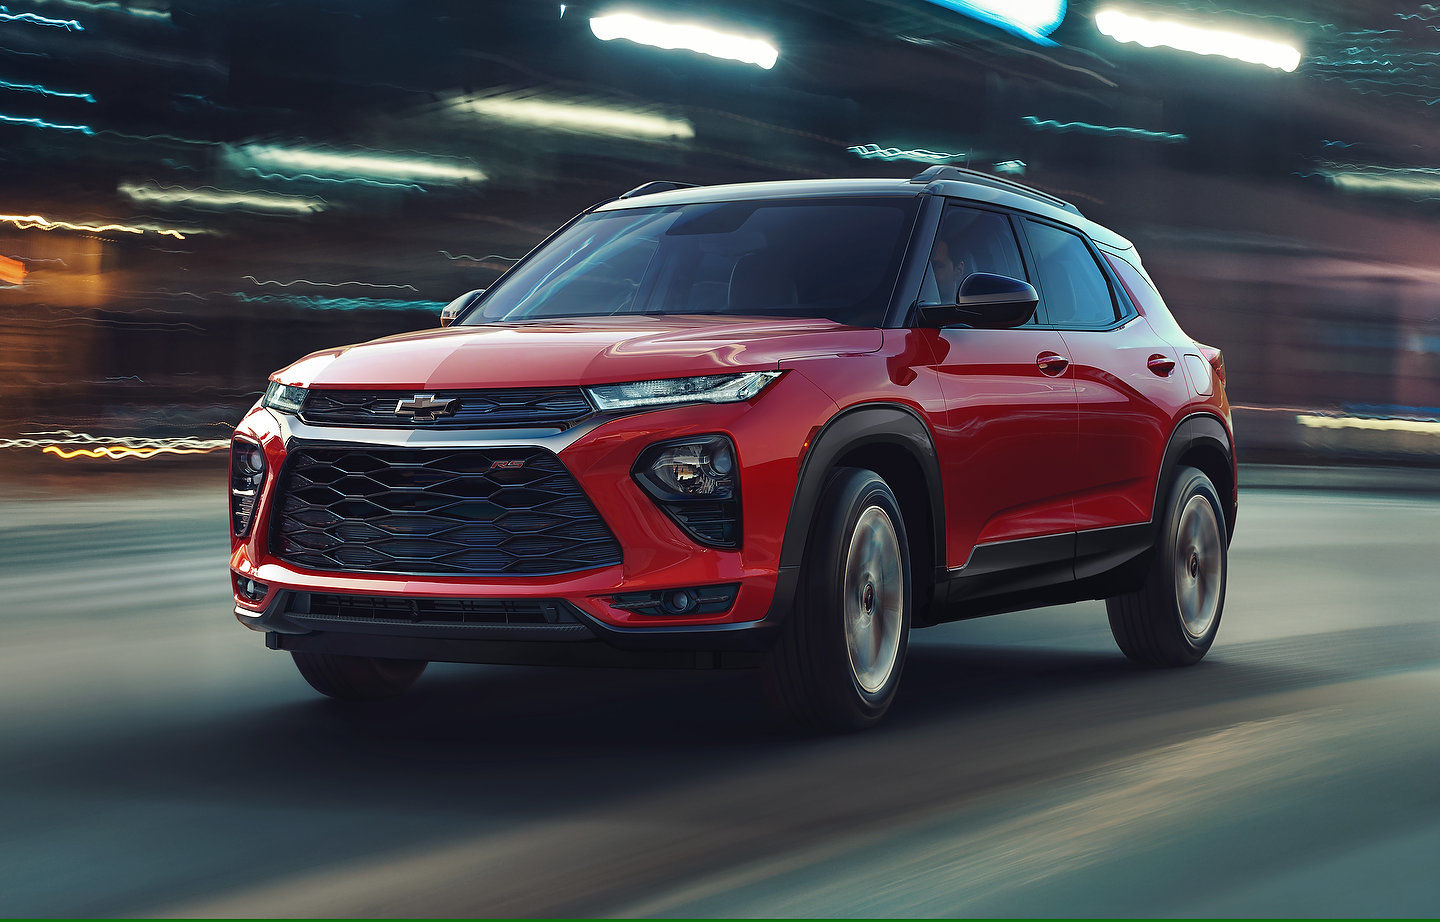 The all-new 2021 Chevrolet Trailblazer presented in Los Angeles